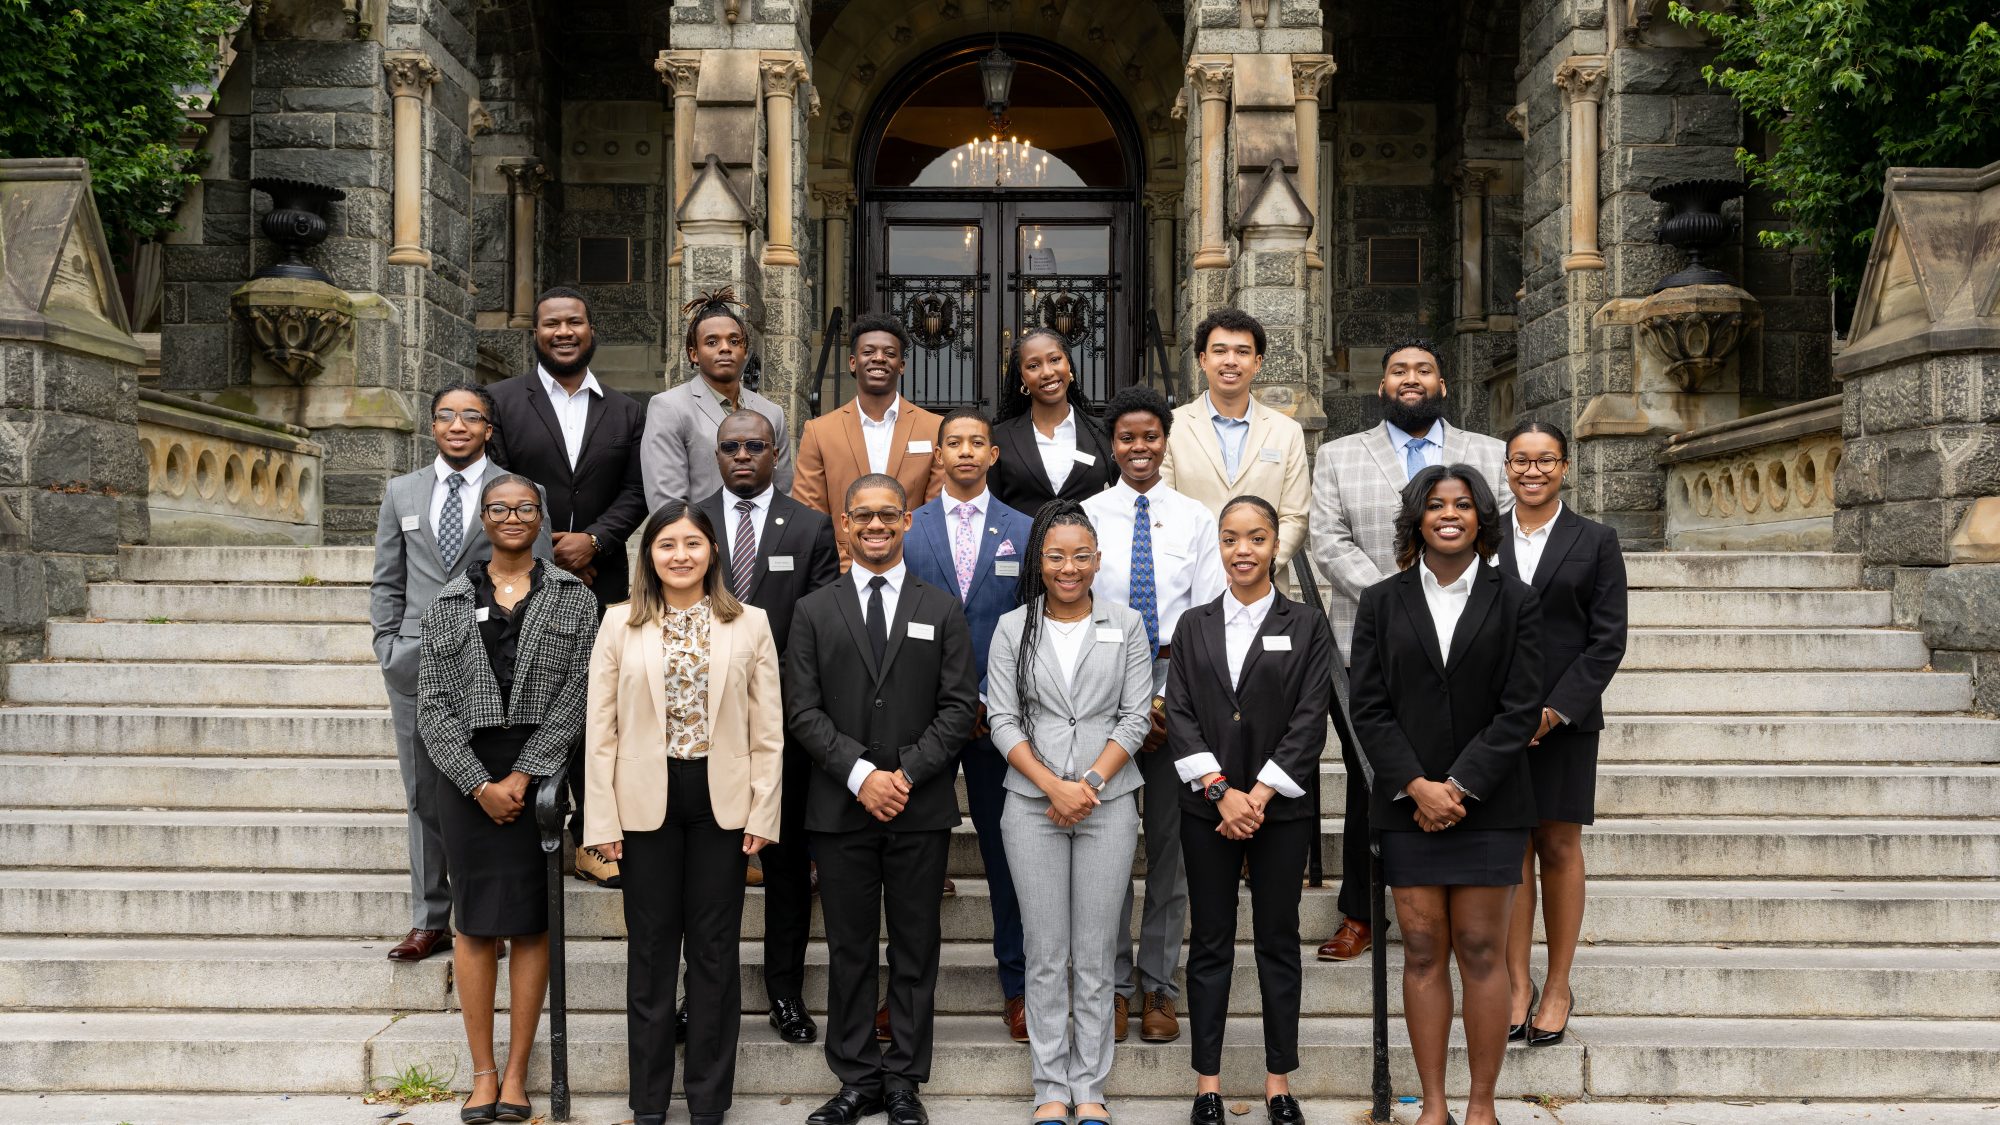 The Security Studies Summer Institute cohort for 2023 stands on the steps of Healy Hall, the historic Georgetown building.